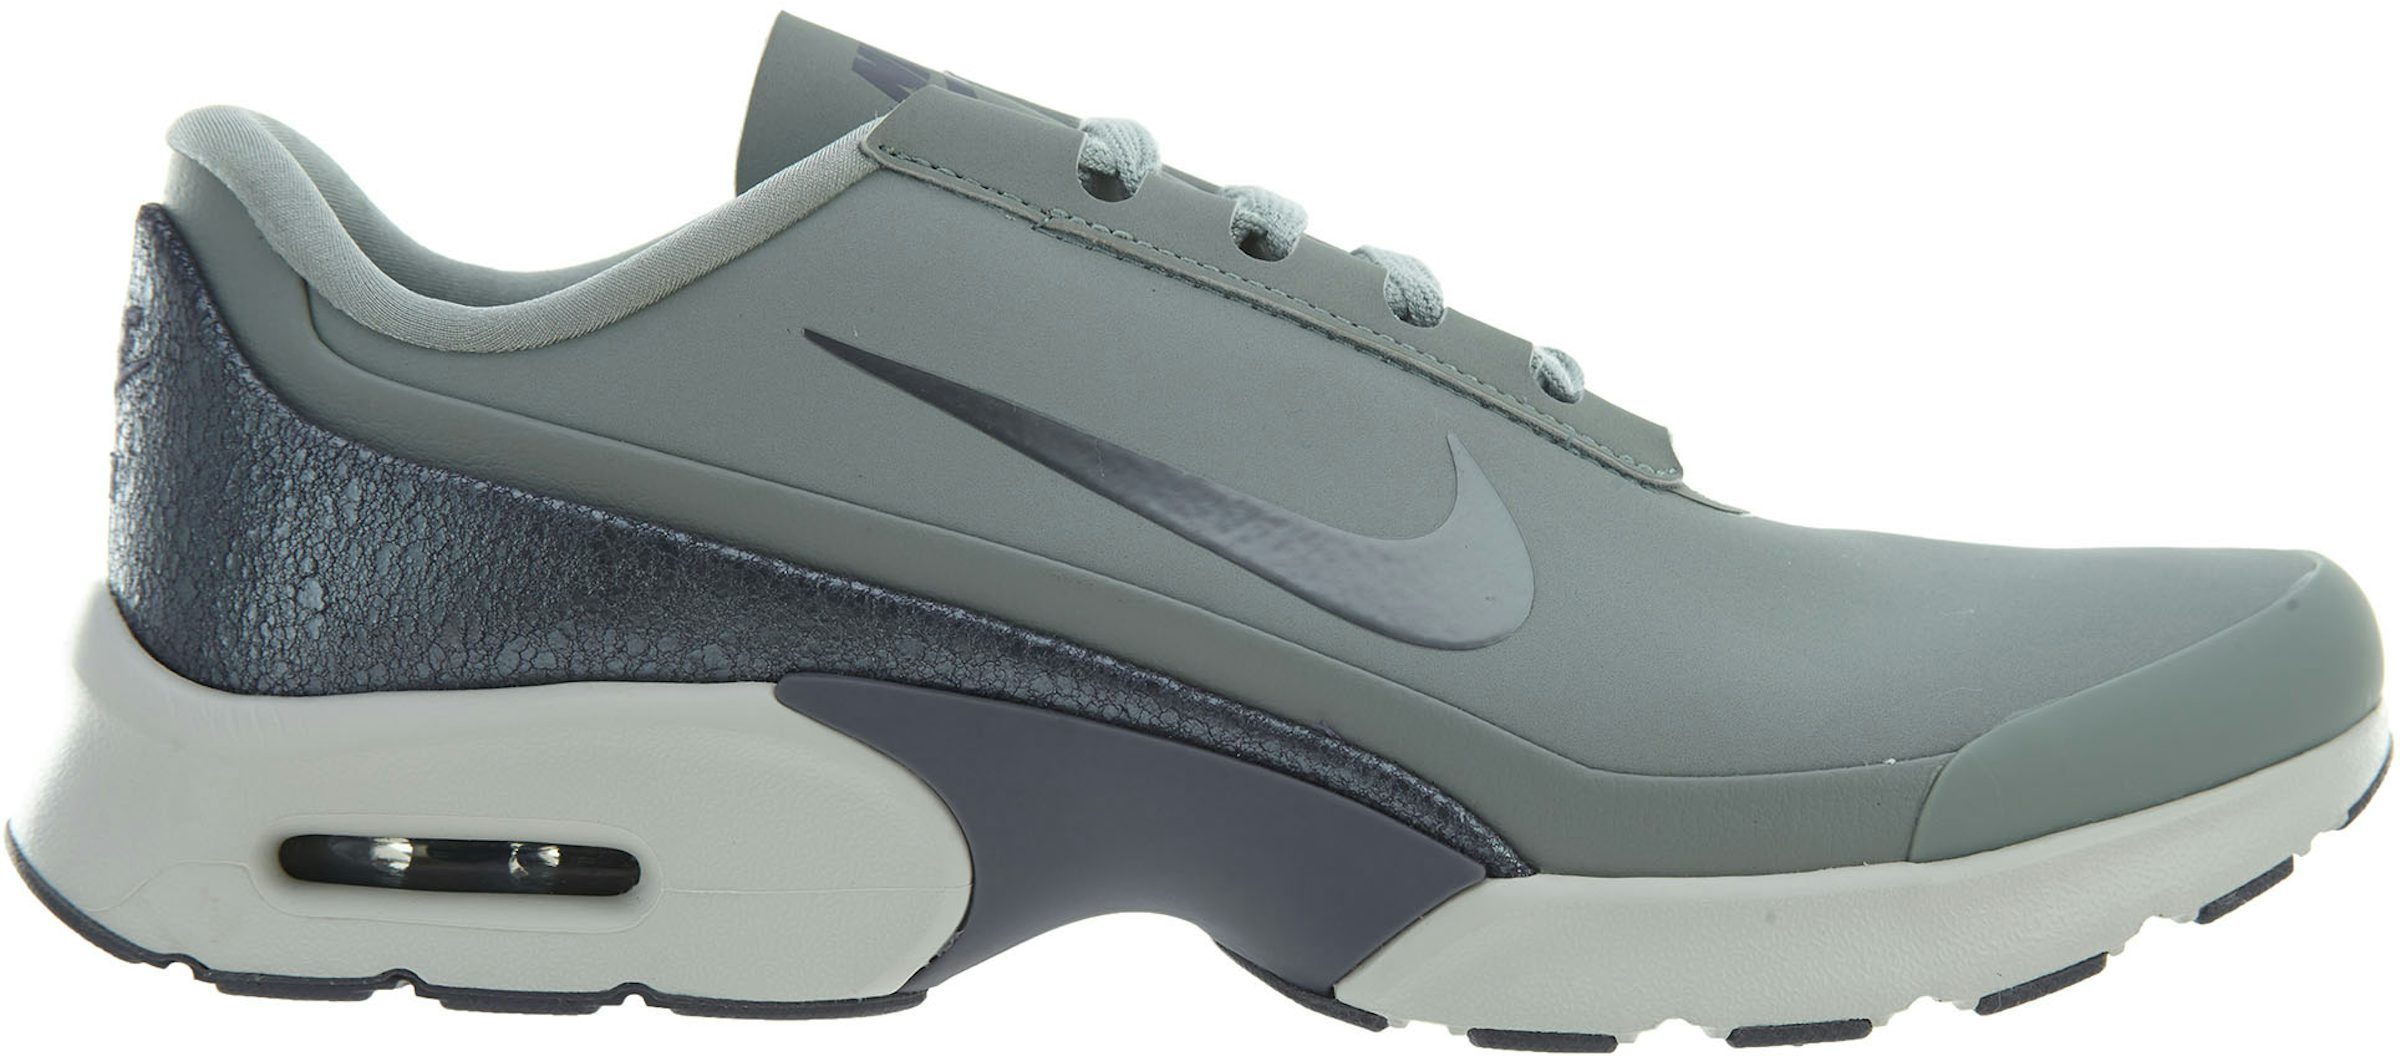 tyv masse specifikation Nike Air Max Jewell Leather Pumice Metallic Cool Grey (Women's) -  AH6790-002 - US